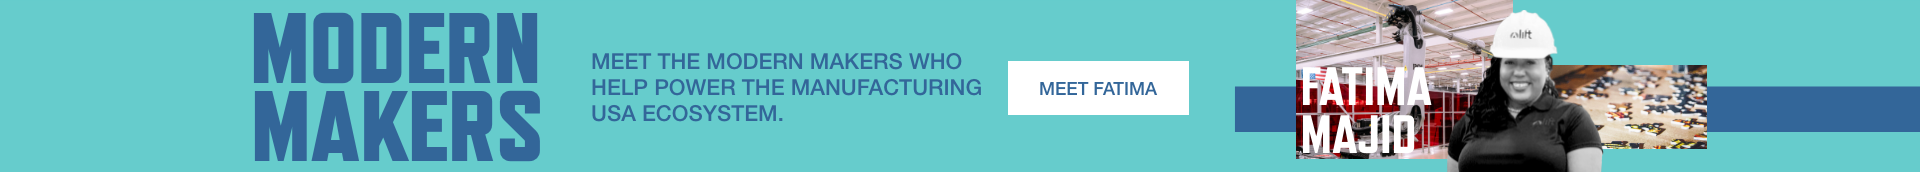 Modern Makers. Meet the Modern Makers who help power the Manufacturing USA ecosystem. Meet Fatima Majid.